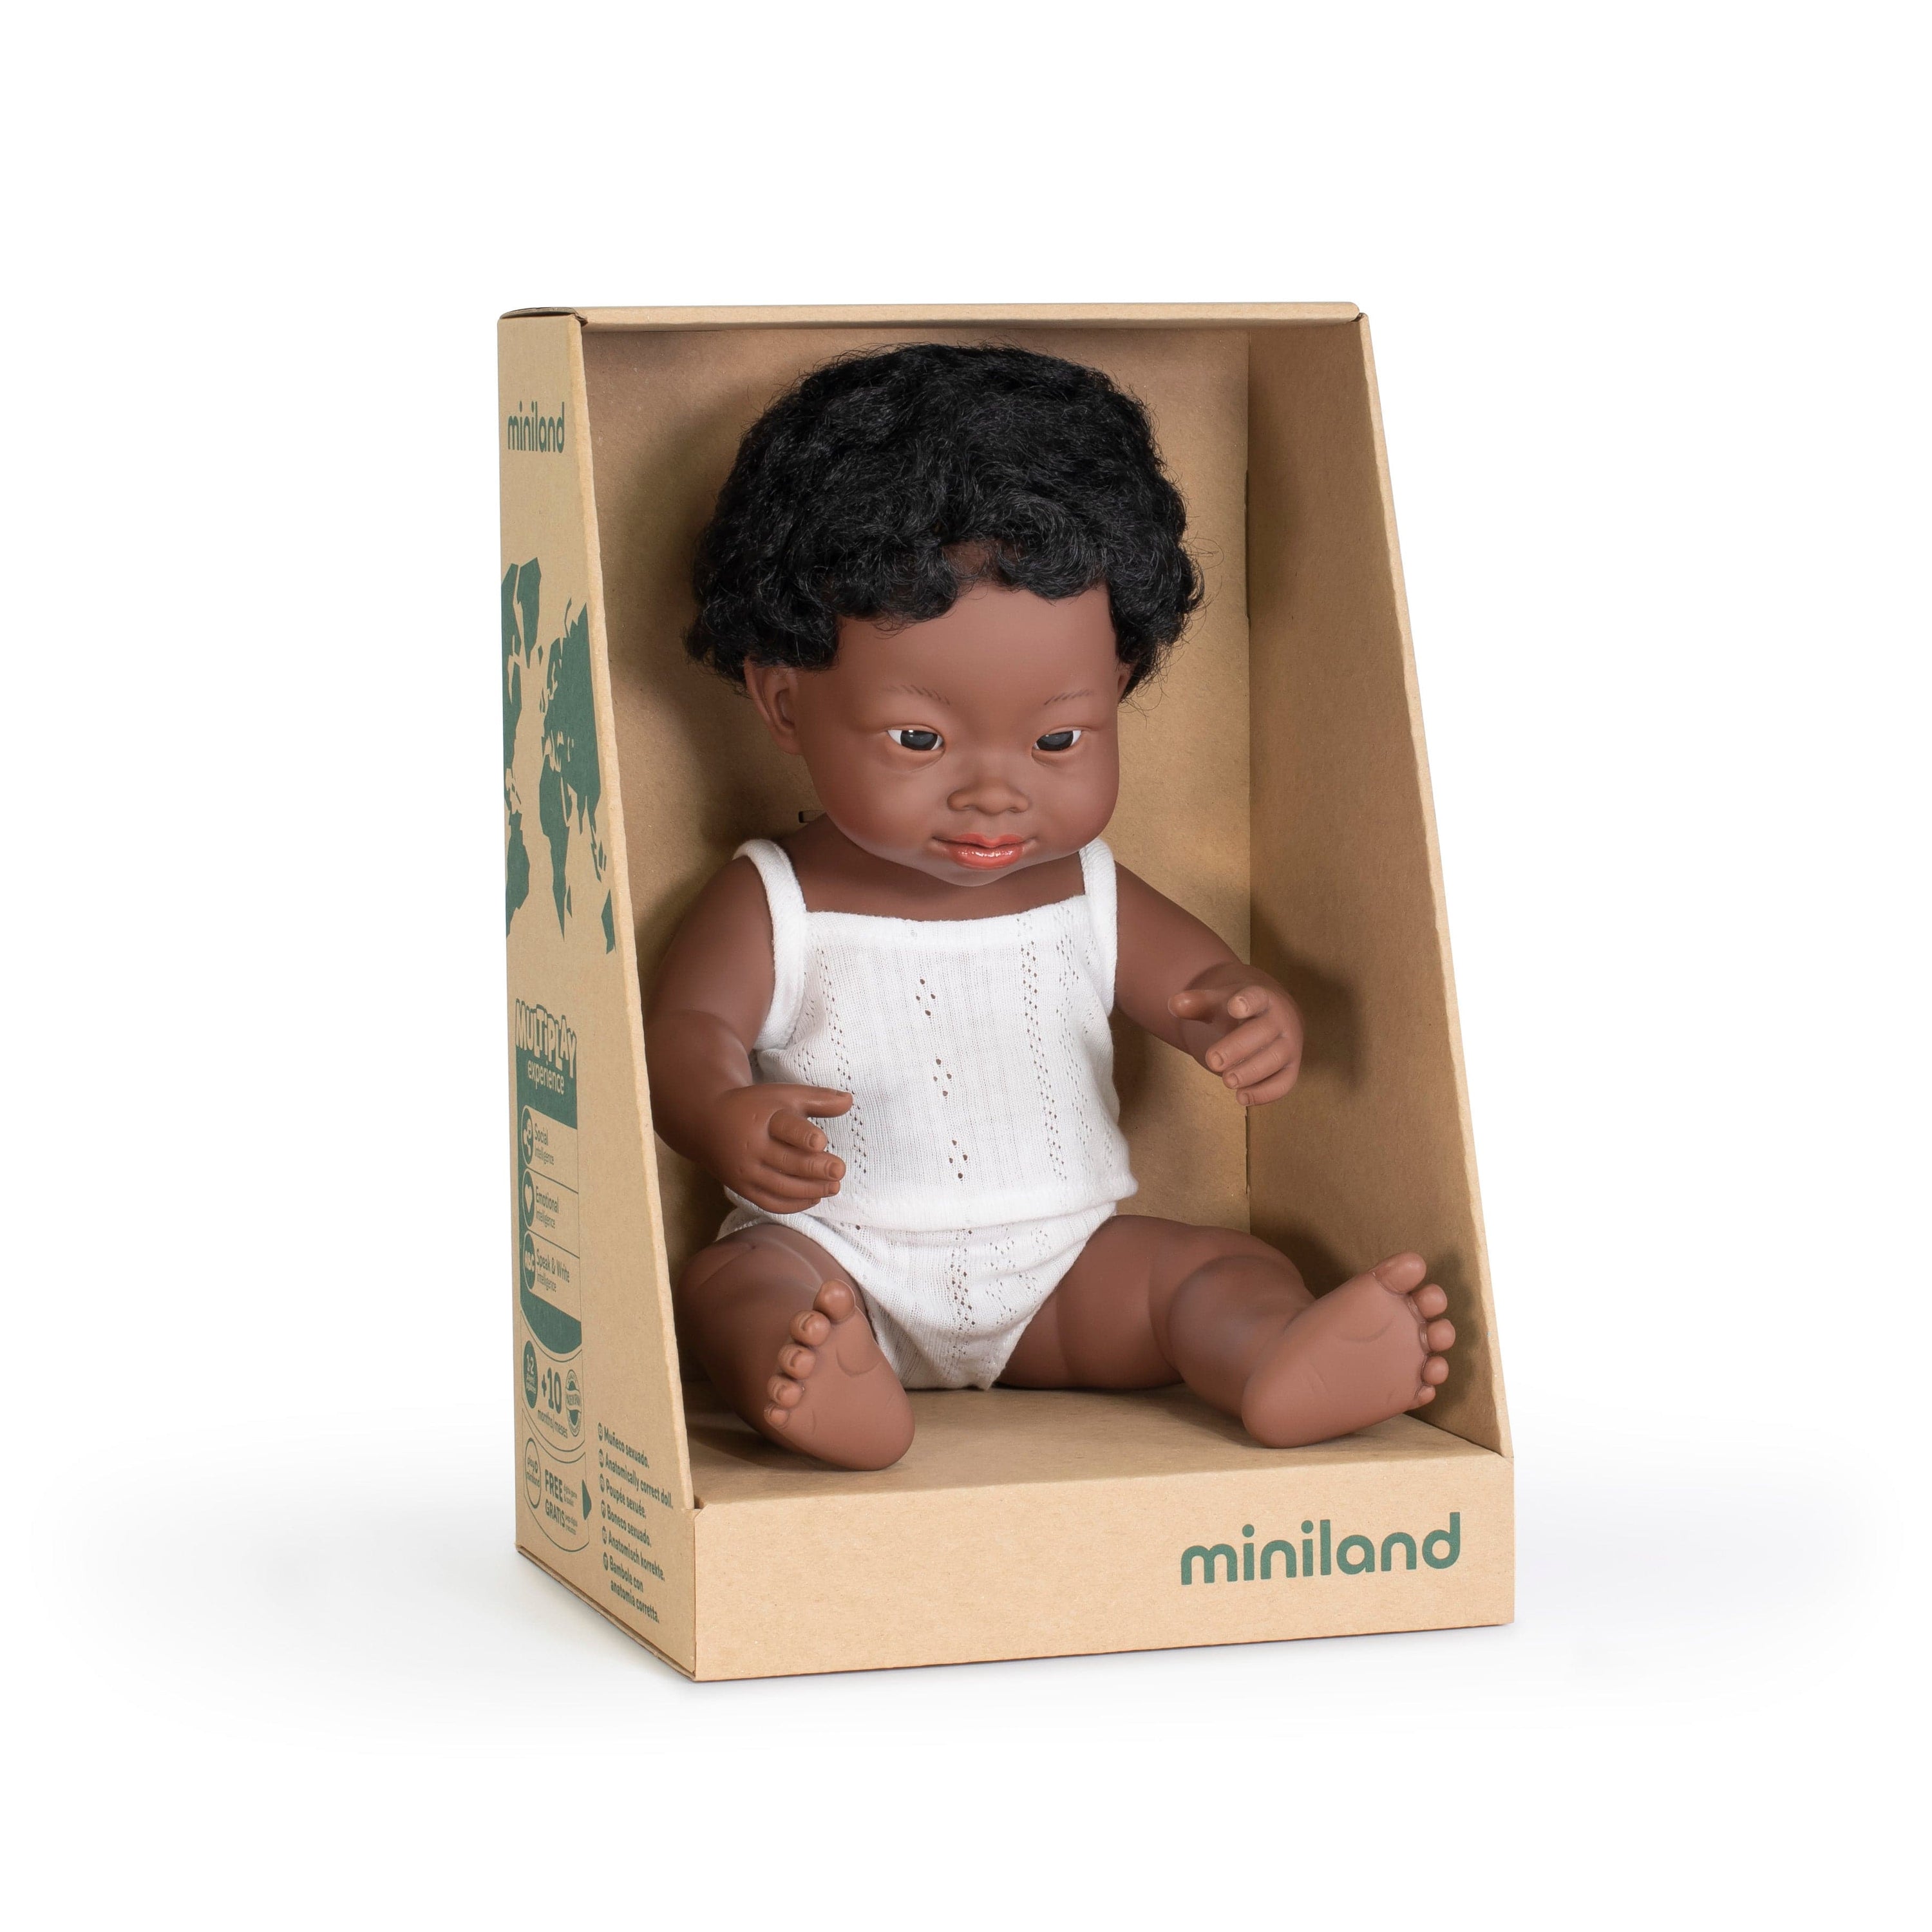 Baby Down Syndrome African Boy Miniland Lil Tulips